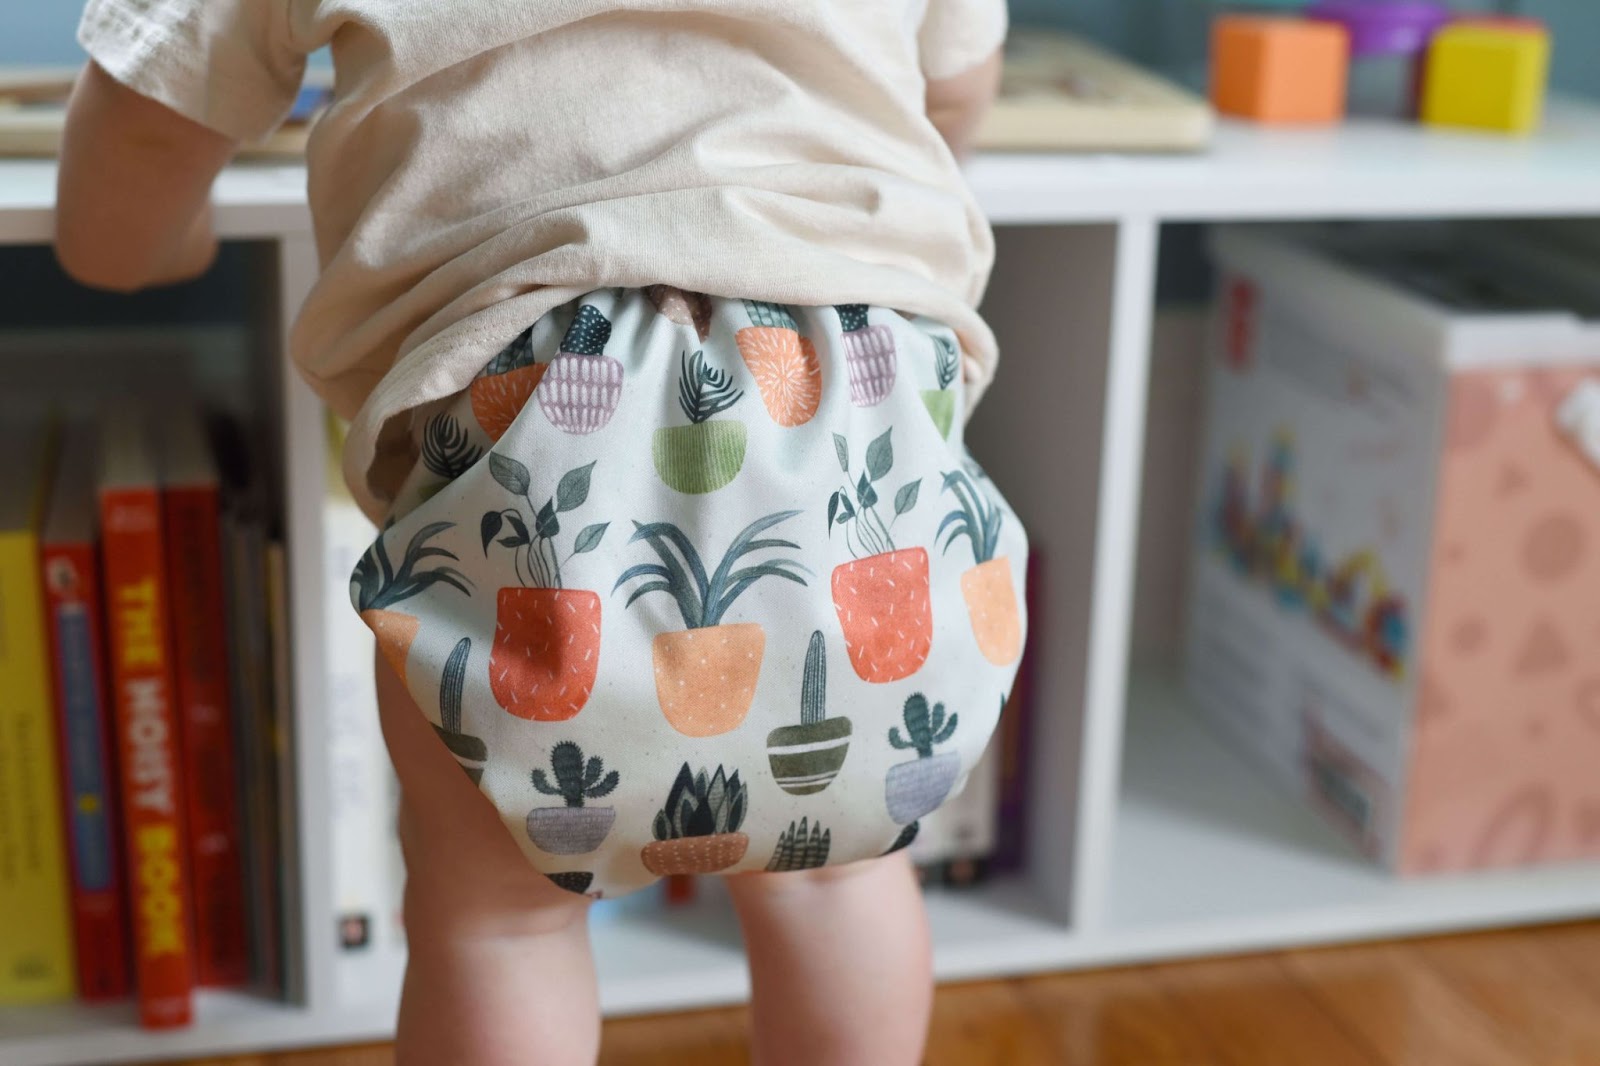 Making Cloth Diapering Cute Again With Henry and Howie–The image shows the back of a baby standing in front of a bookshelf. The baby is wearing a Henry and Howie cloth diaper that has a light blue background with a cartoon design of colorful potted plants. 